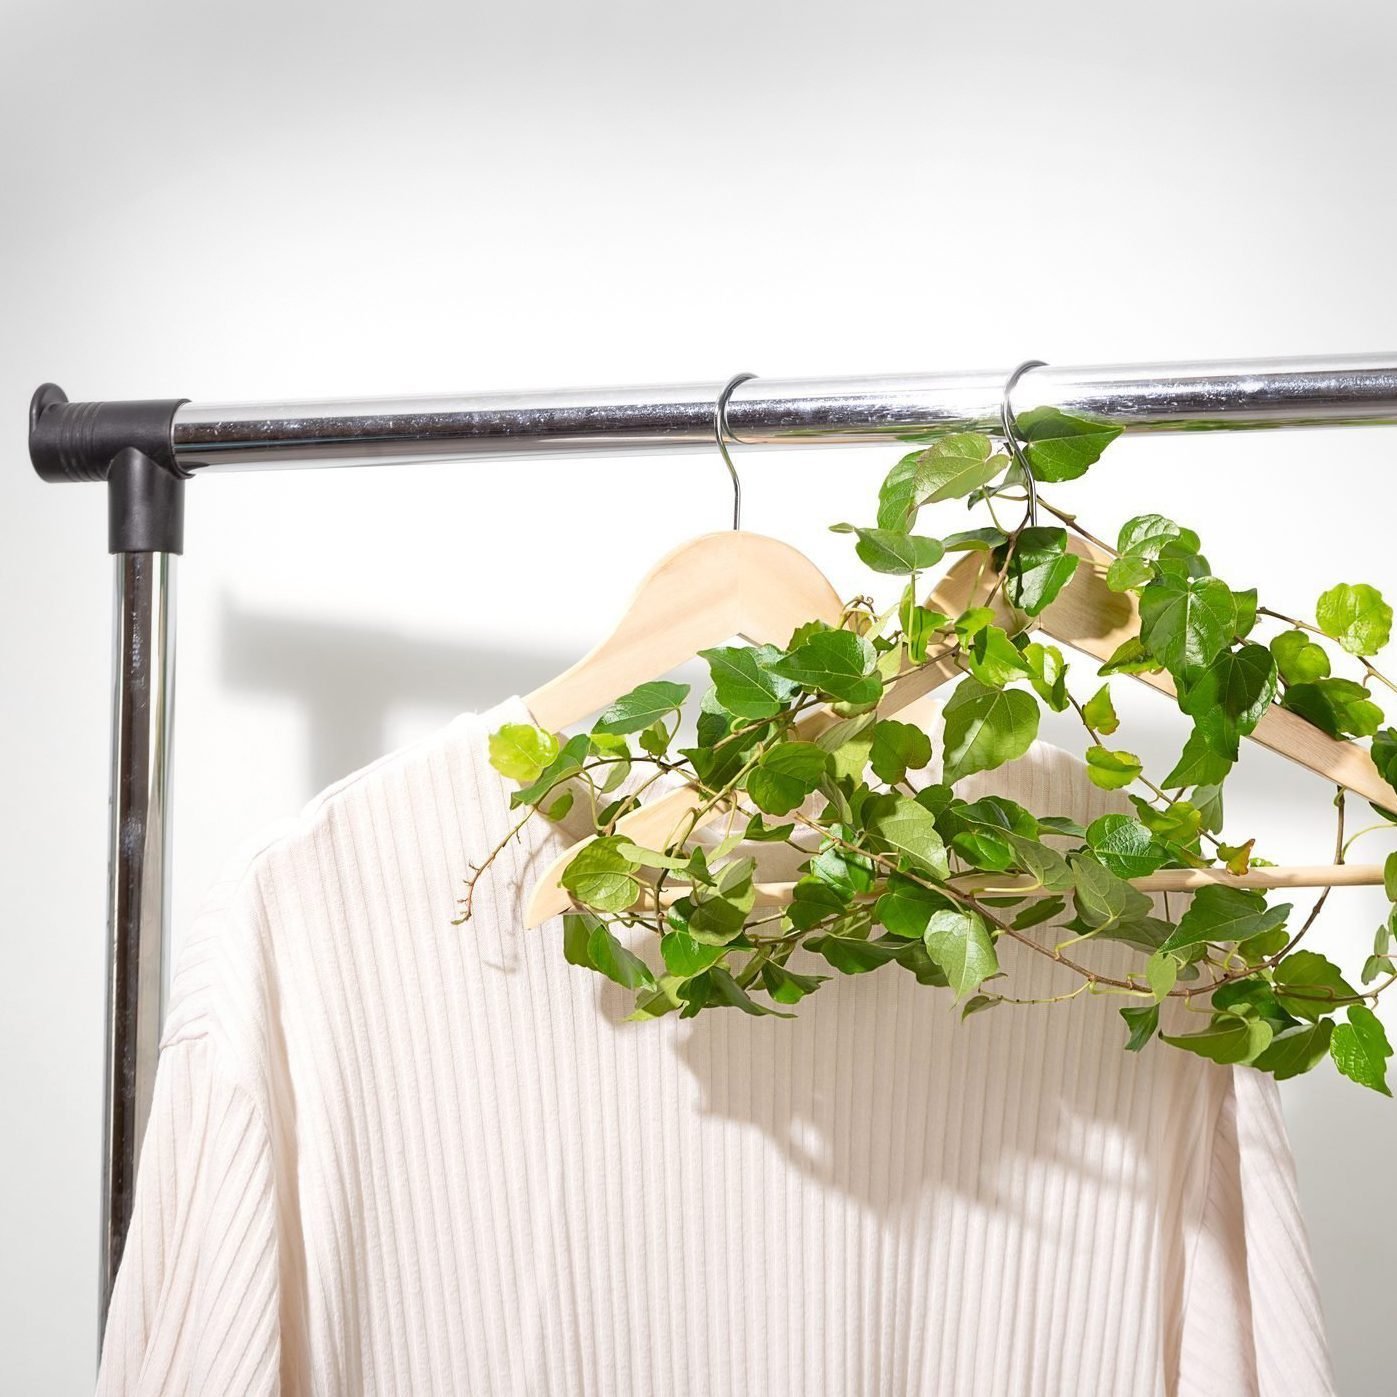 10 Sustainable Cashmere Sweaters From Ethical Brands (2024) - The Good Trade